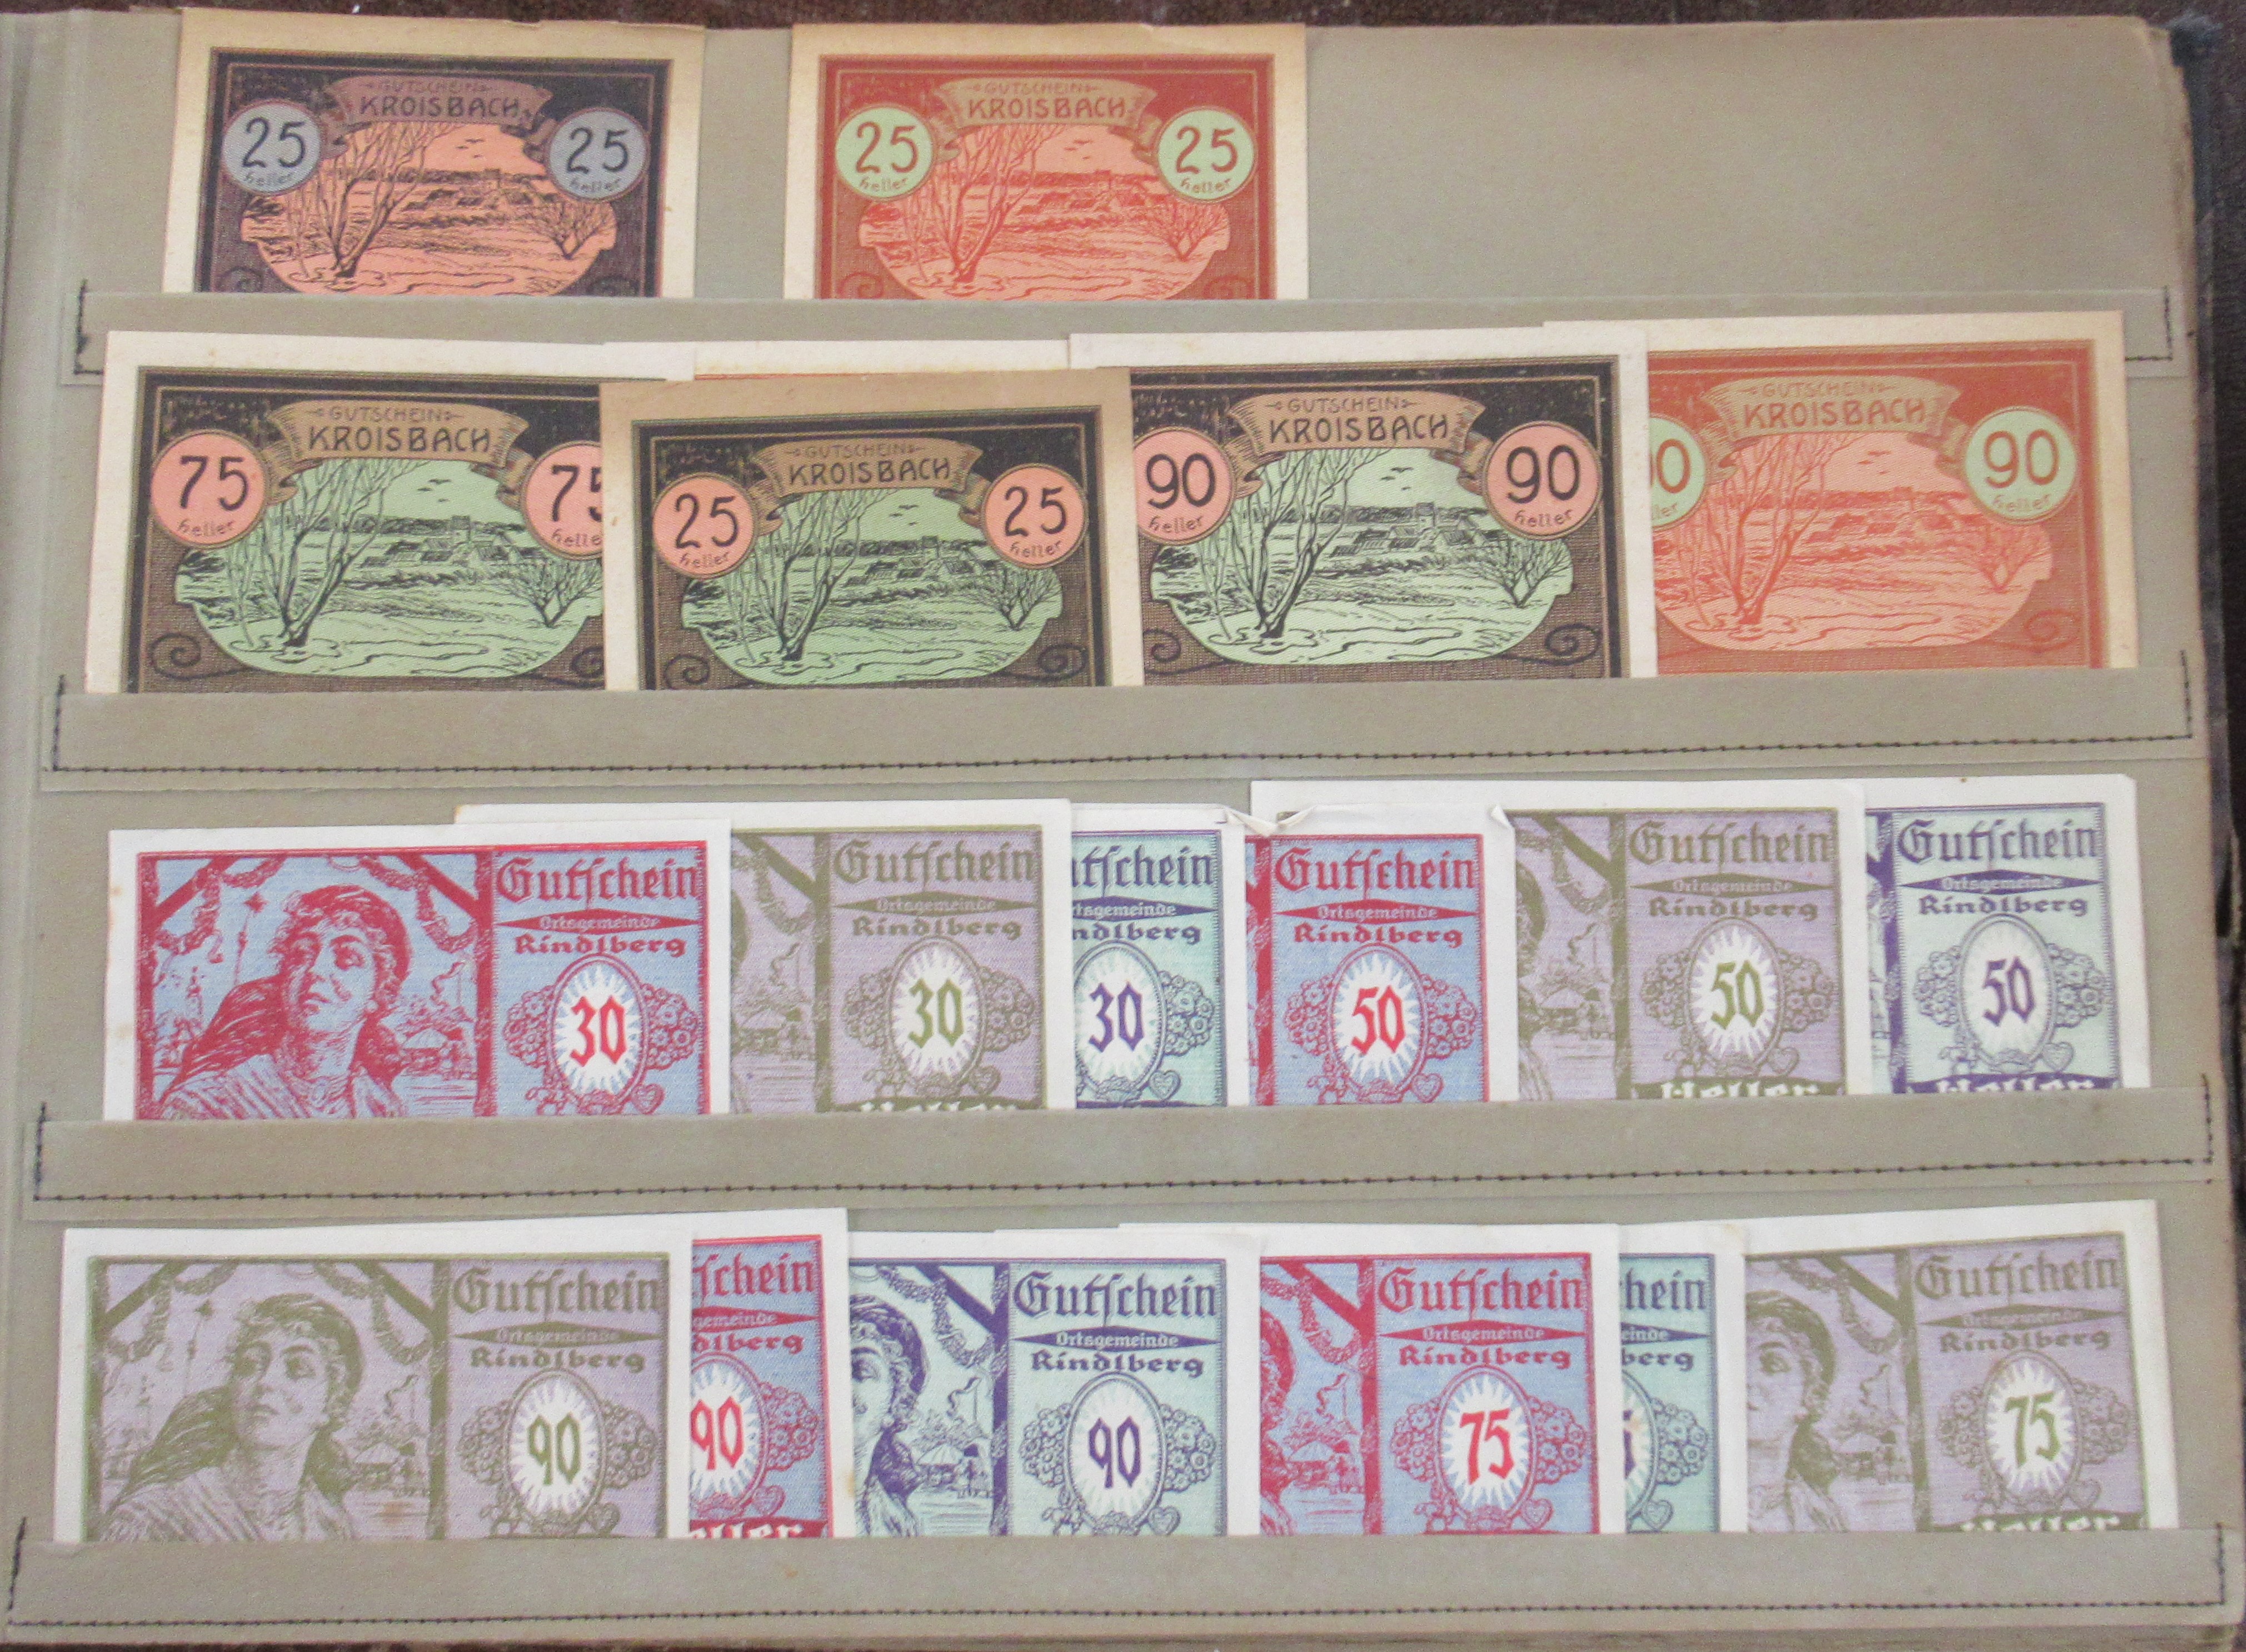 An album of Continental bank notes